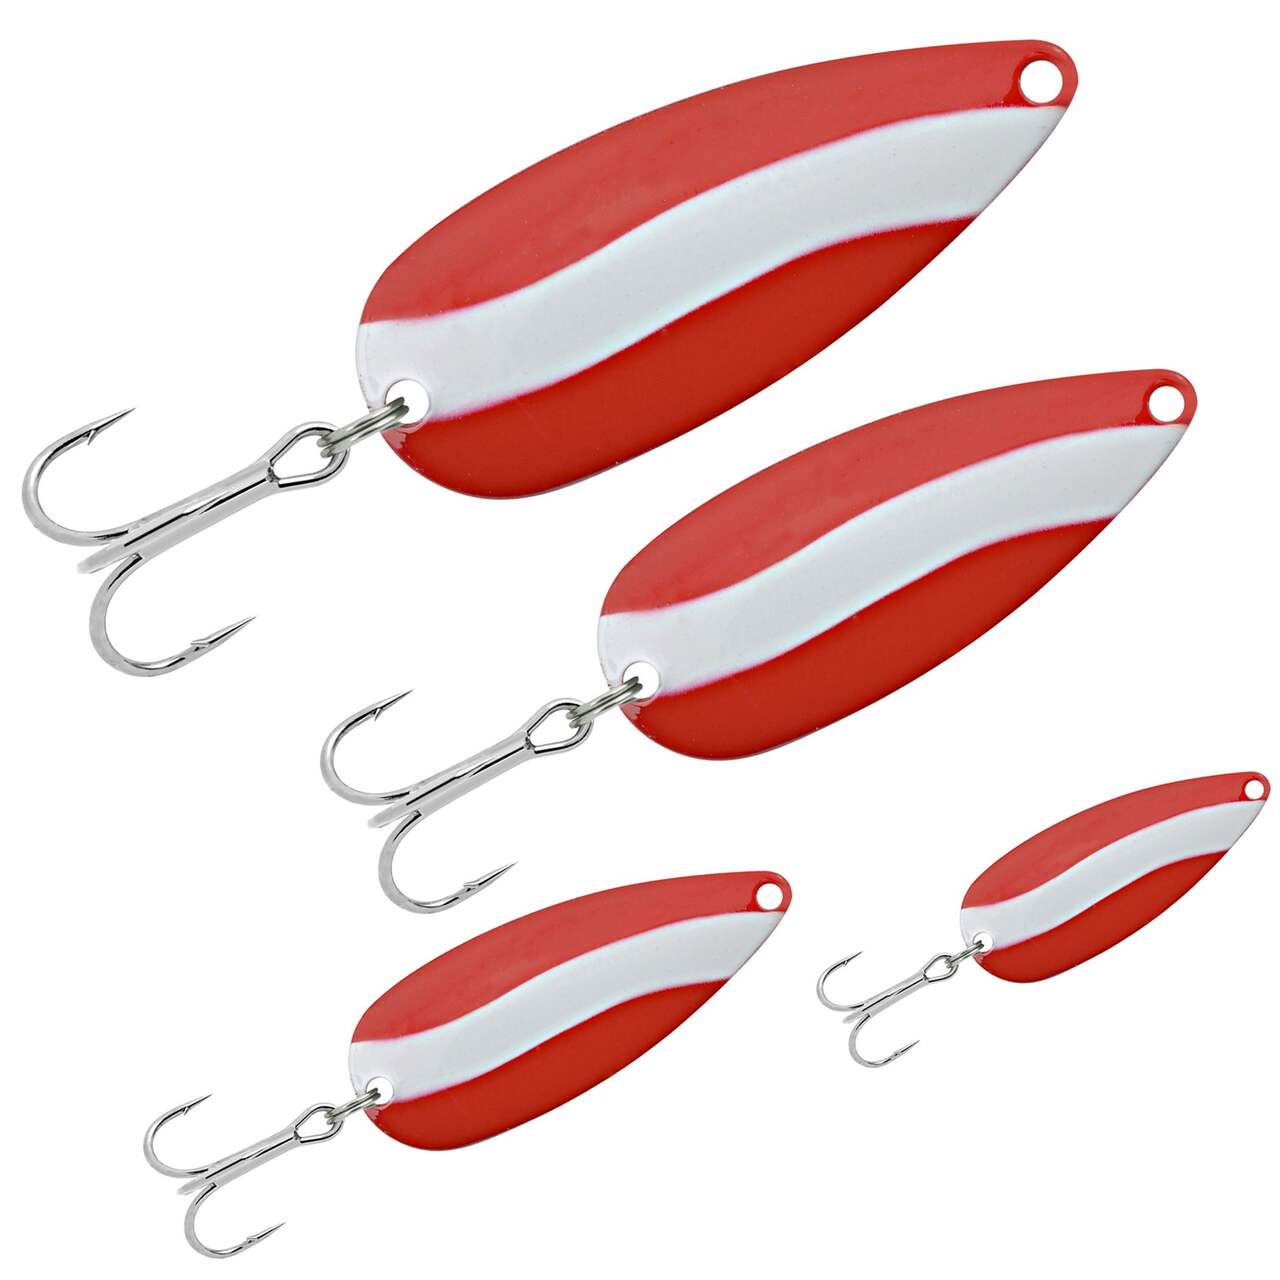 Danielson Spoon Lure, Red/White